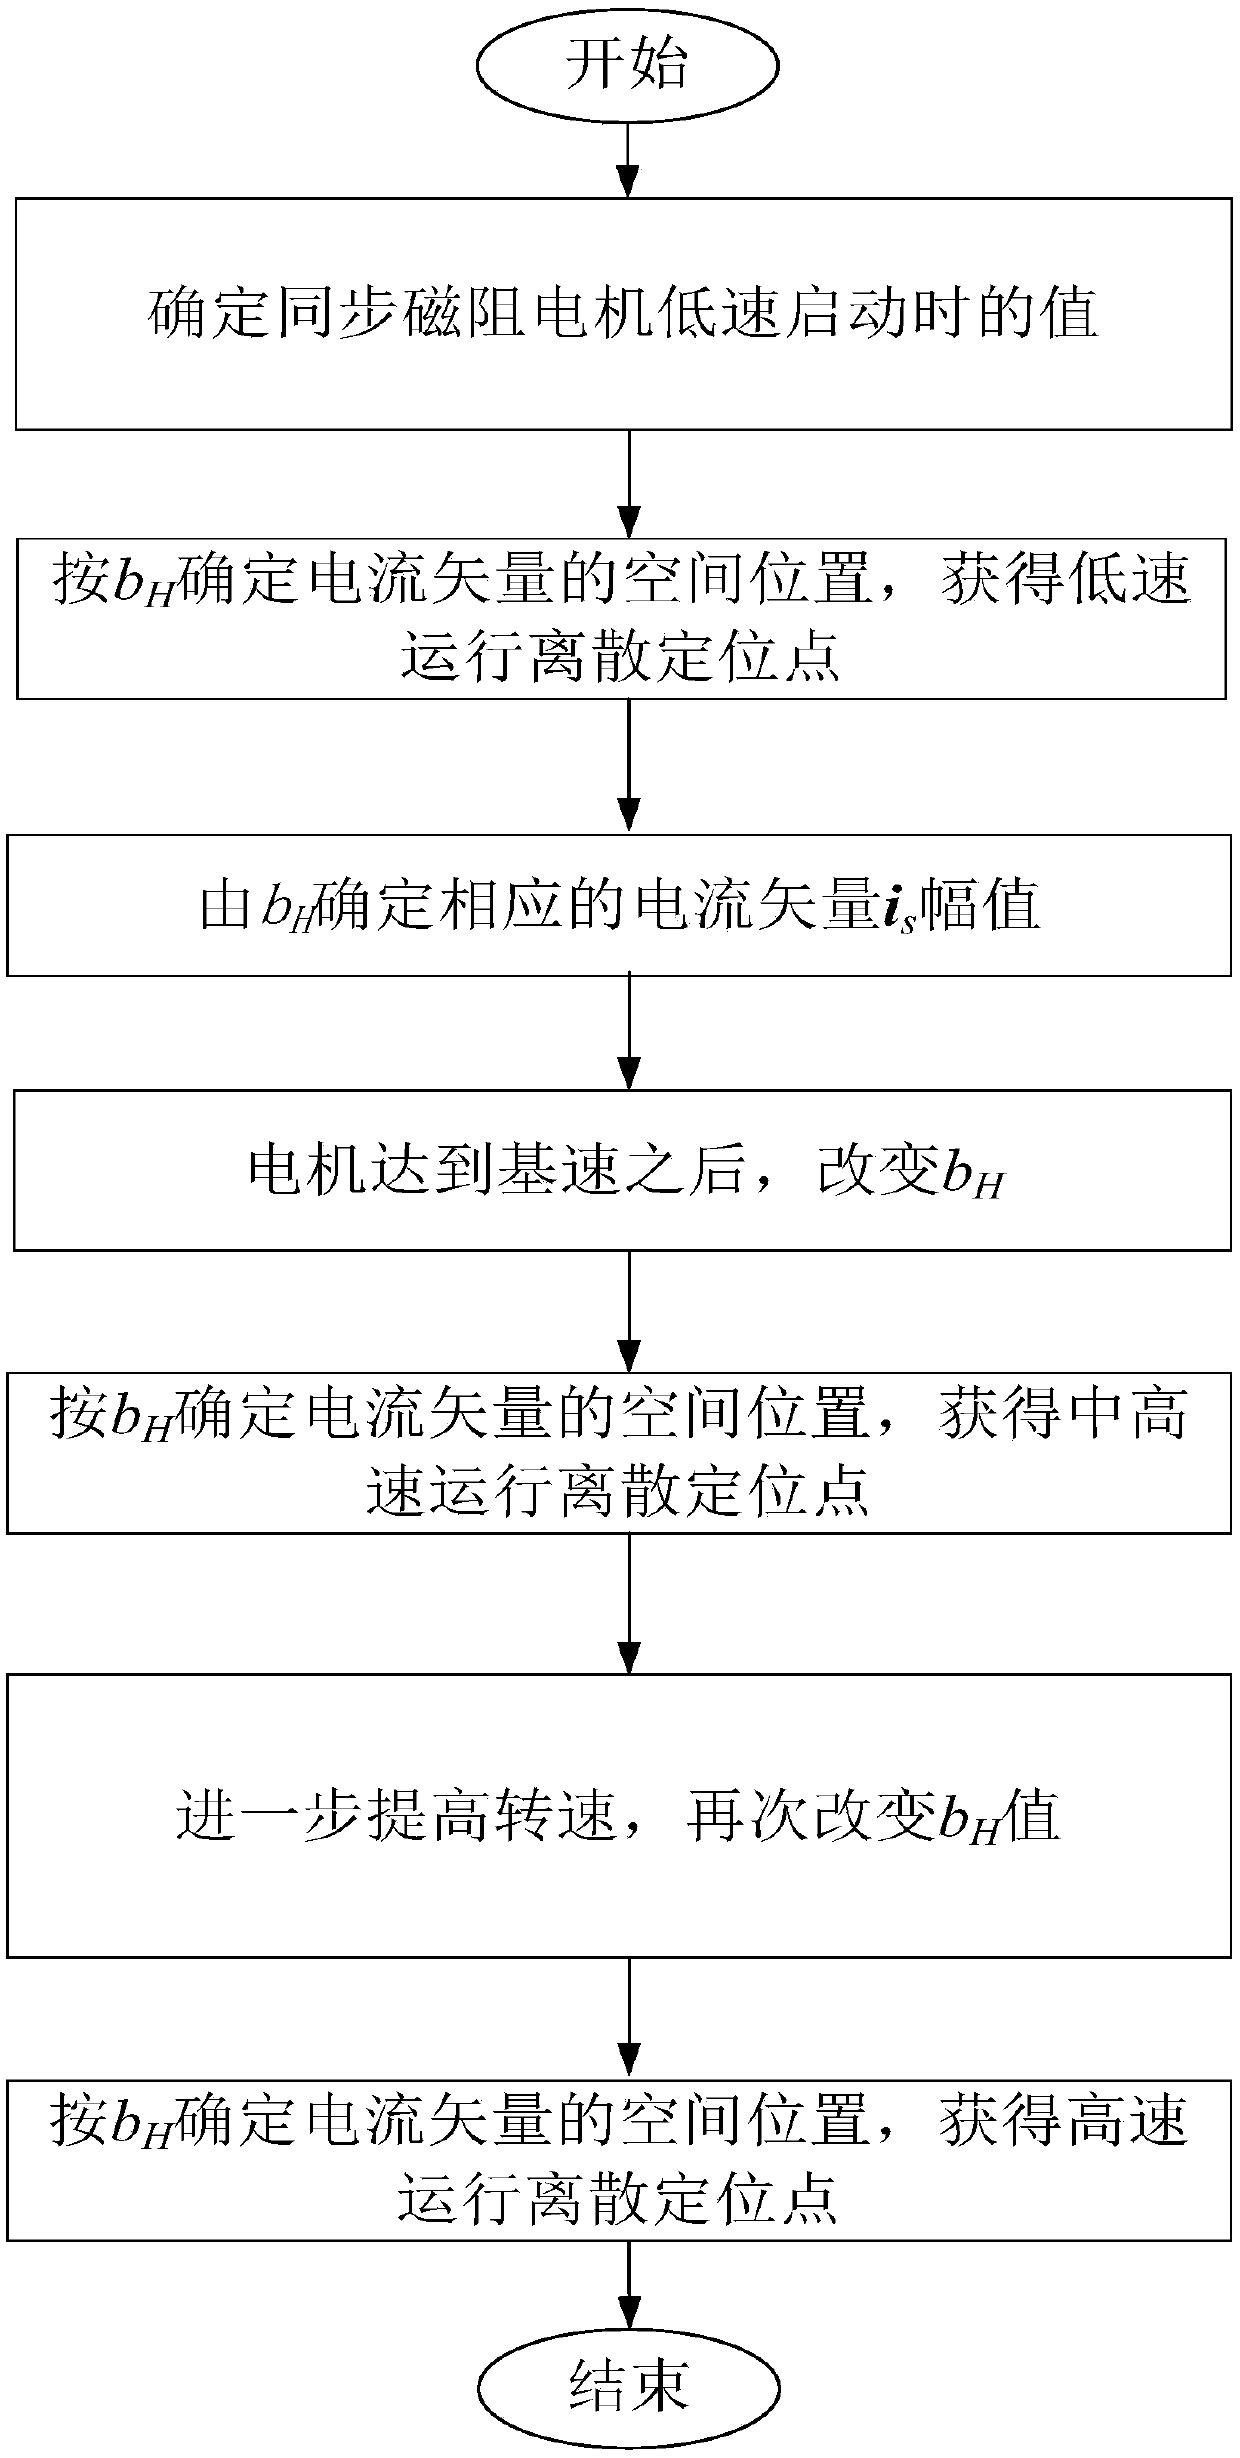 New energy vehicle synchronous reluctance motor control method based on AC stepping control